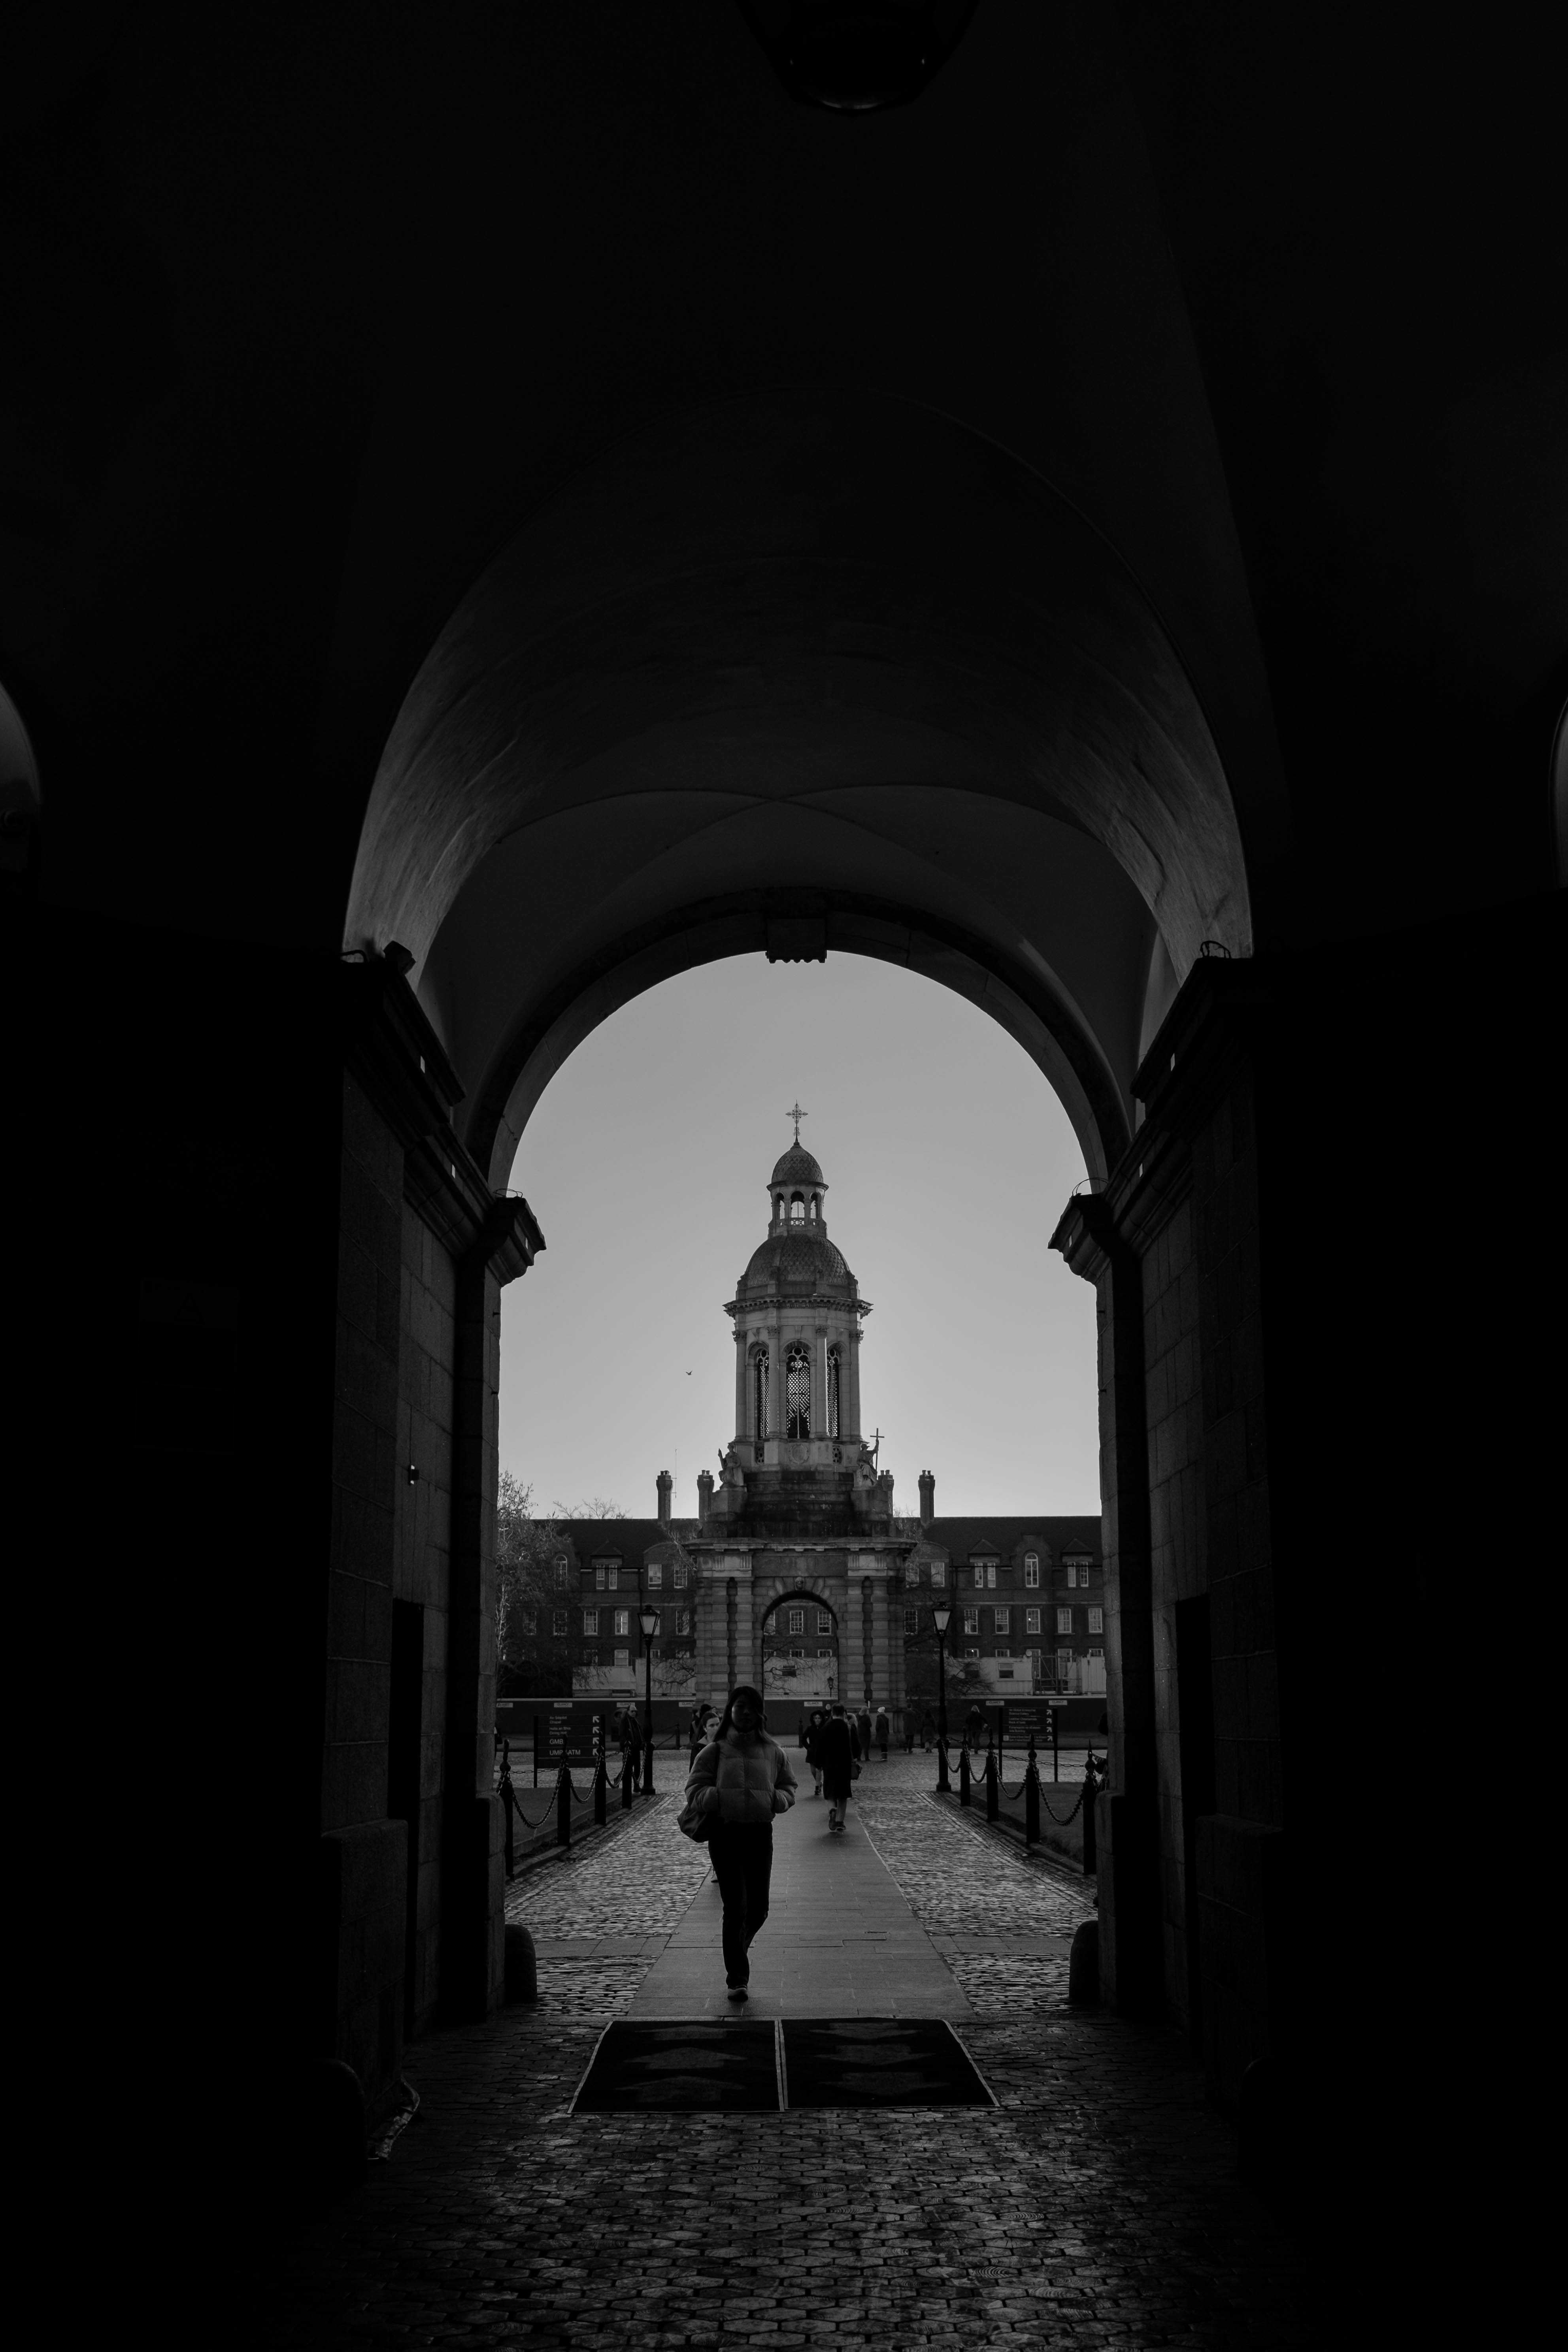 The main entrance gate at Trinity College. A girl is walking through the hallway.